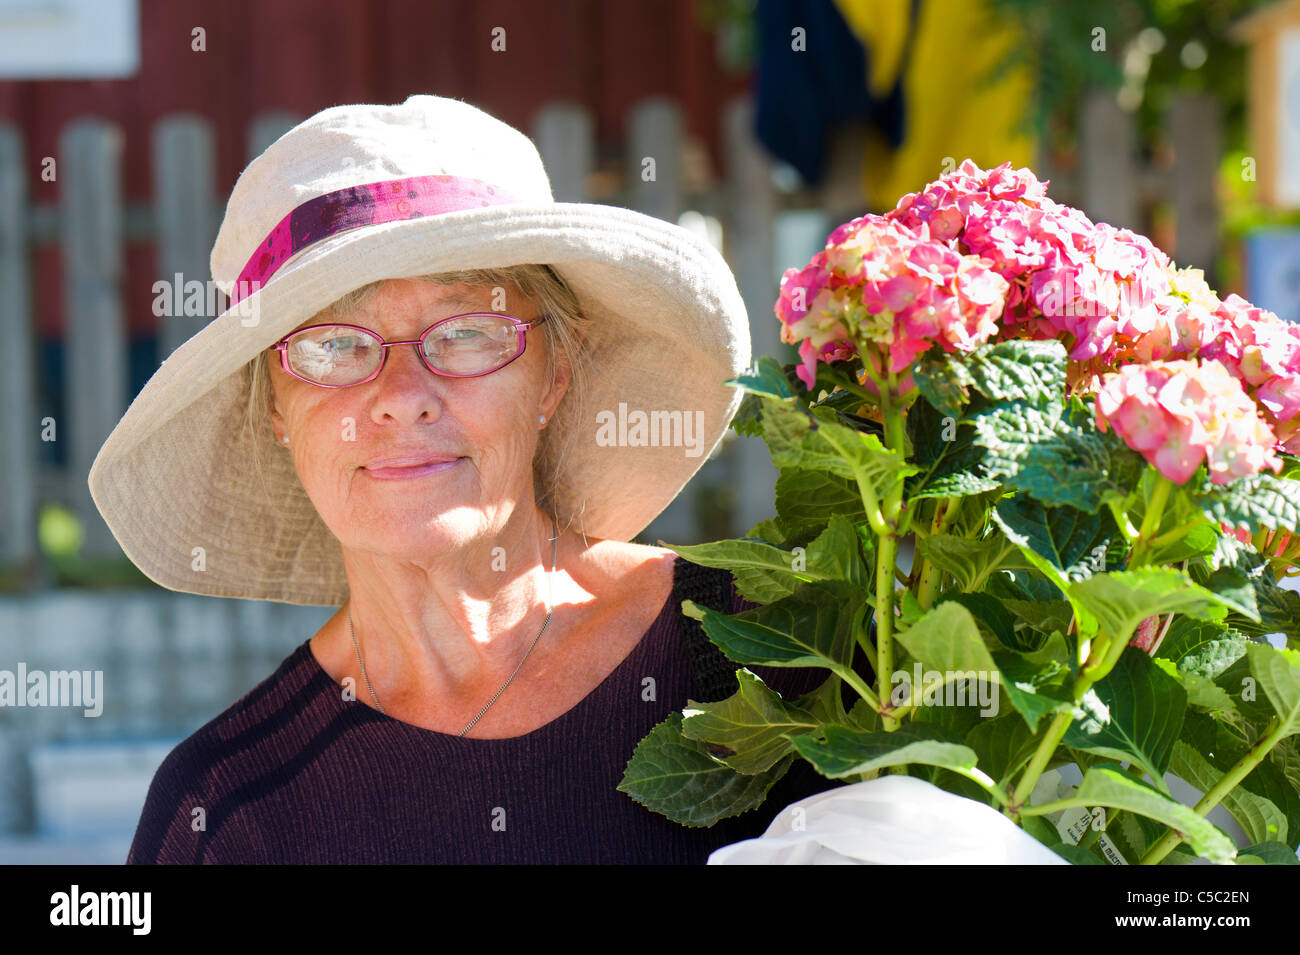 Close-up portrait of a senior woman with hat and hydrangea flowers Stock Photo